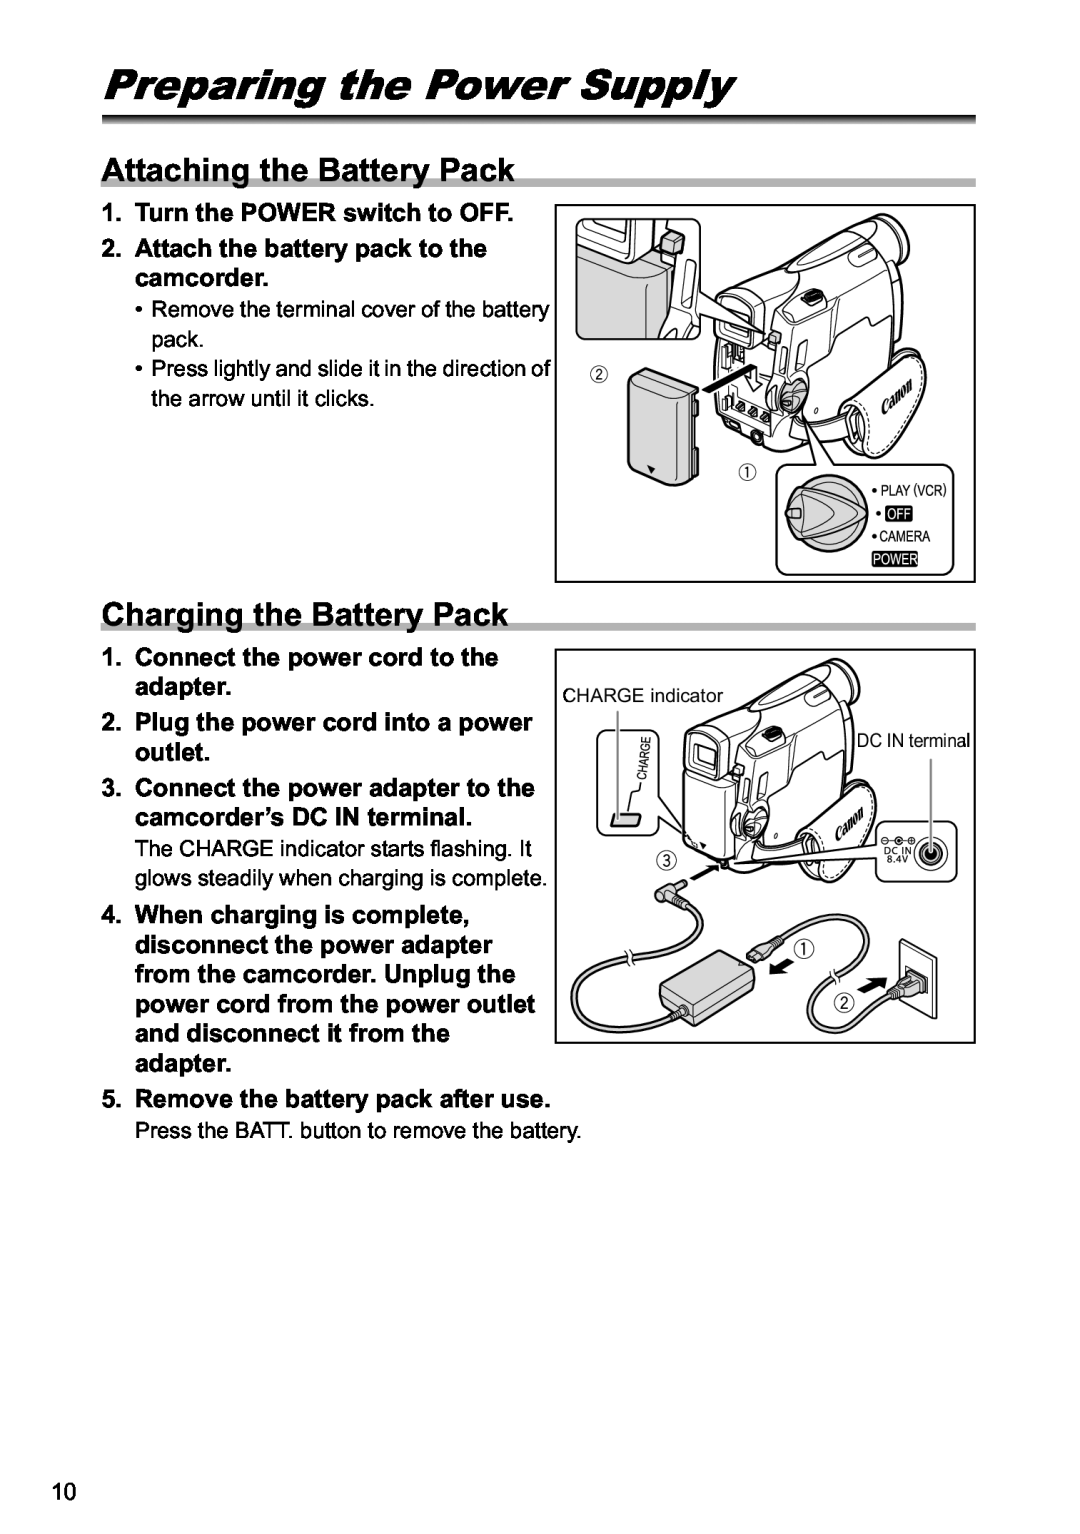 Canon MV800i, MV790 instruction manual Preparing the Power Supply, Attaching the Battery Pack, Charging the Battery Pack 